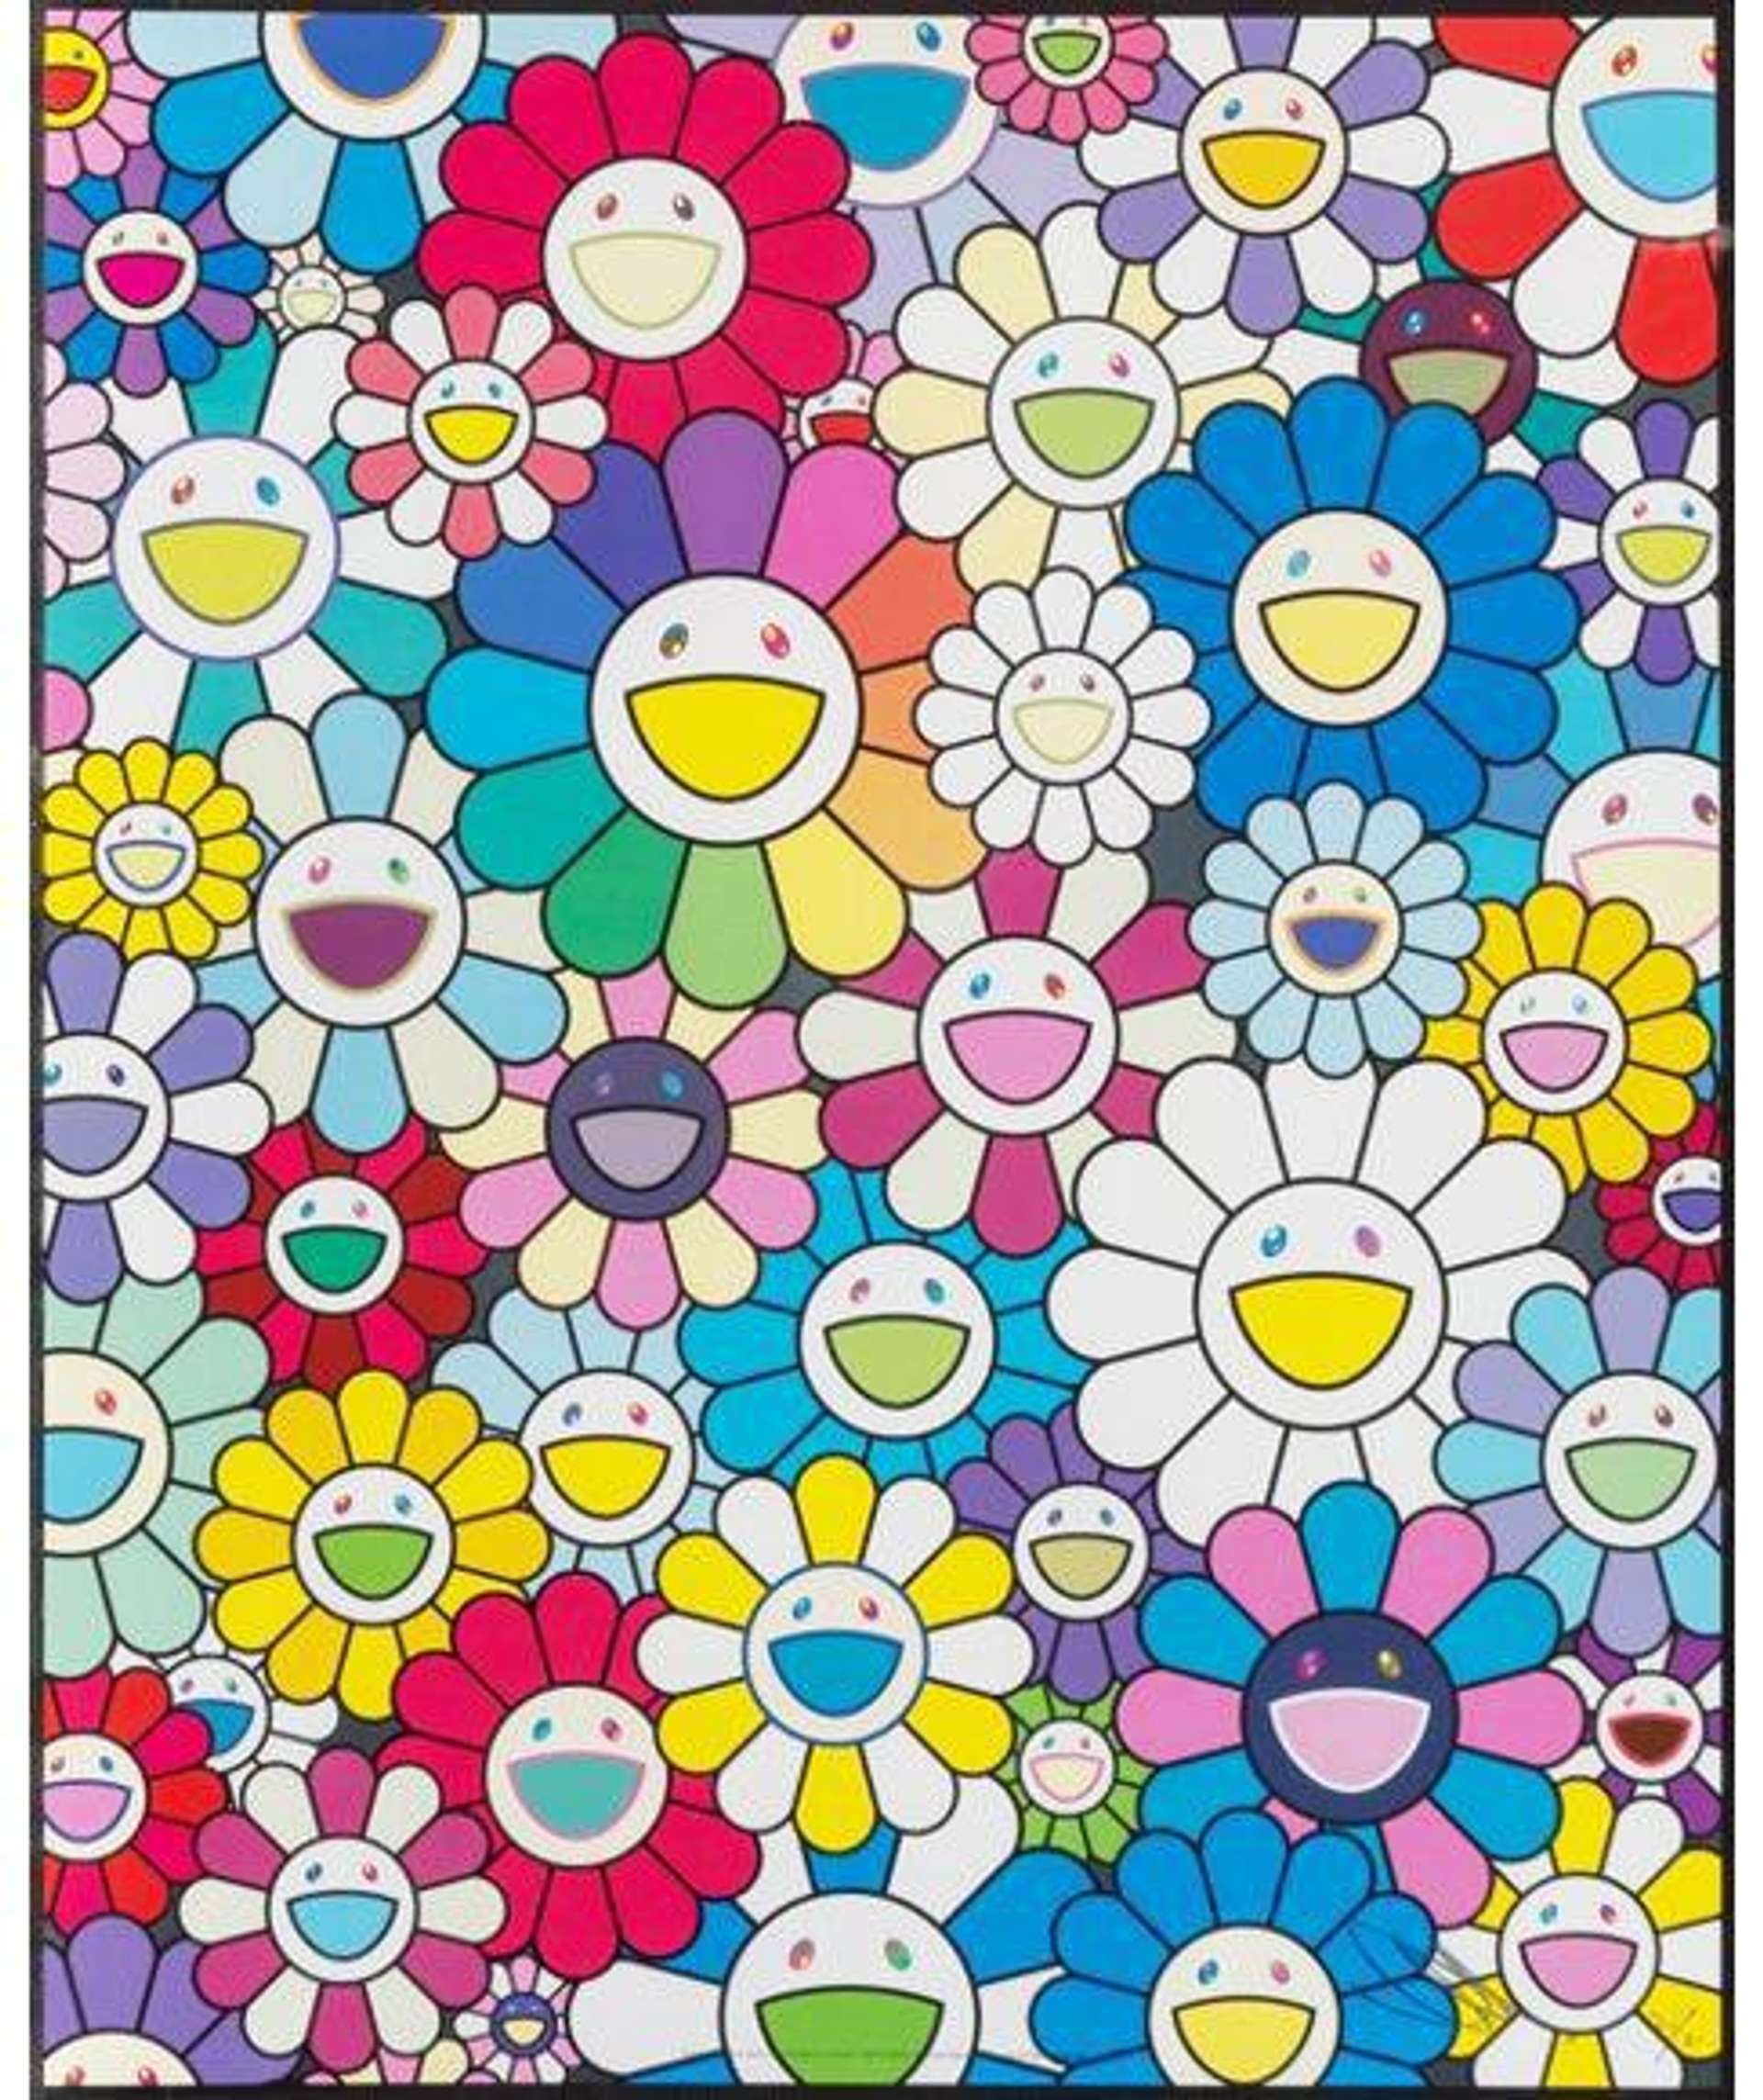 Takashi Murakami: Field Of Flowers Seen From The Stairs To Heaven - Signed Print